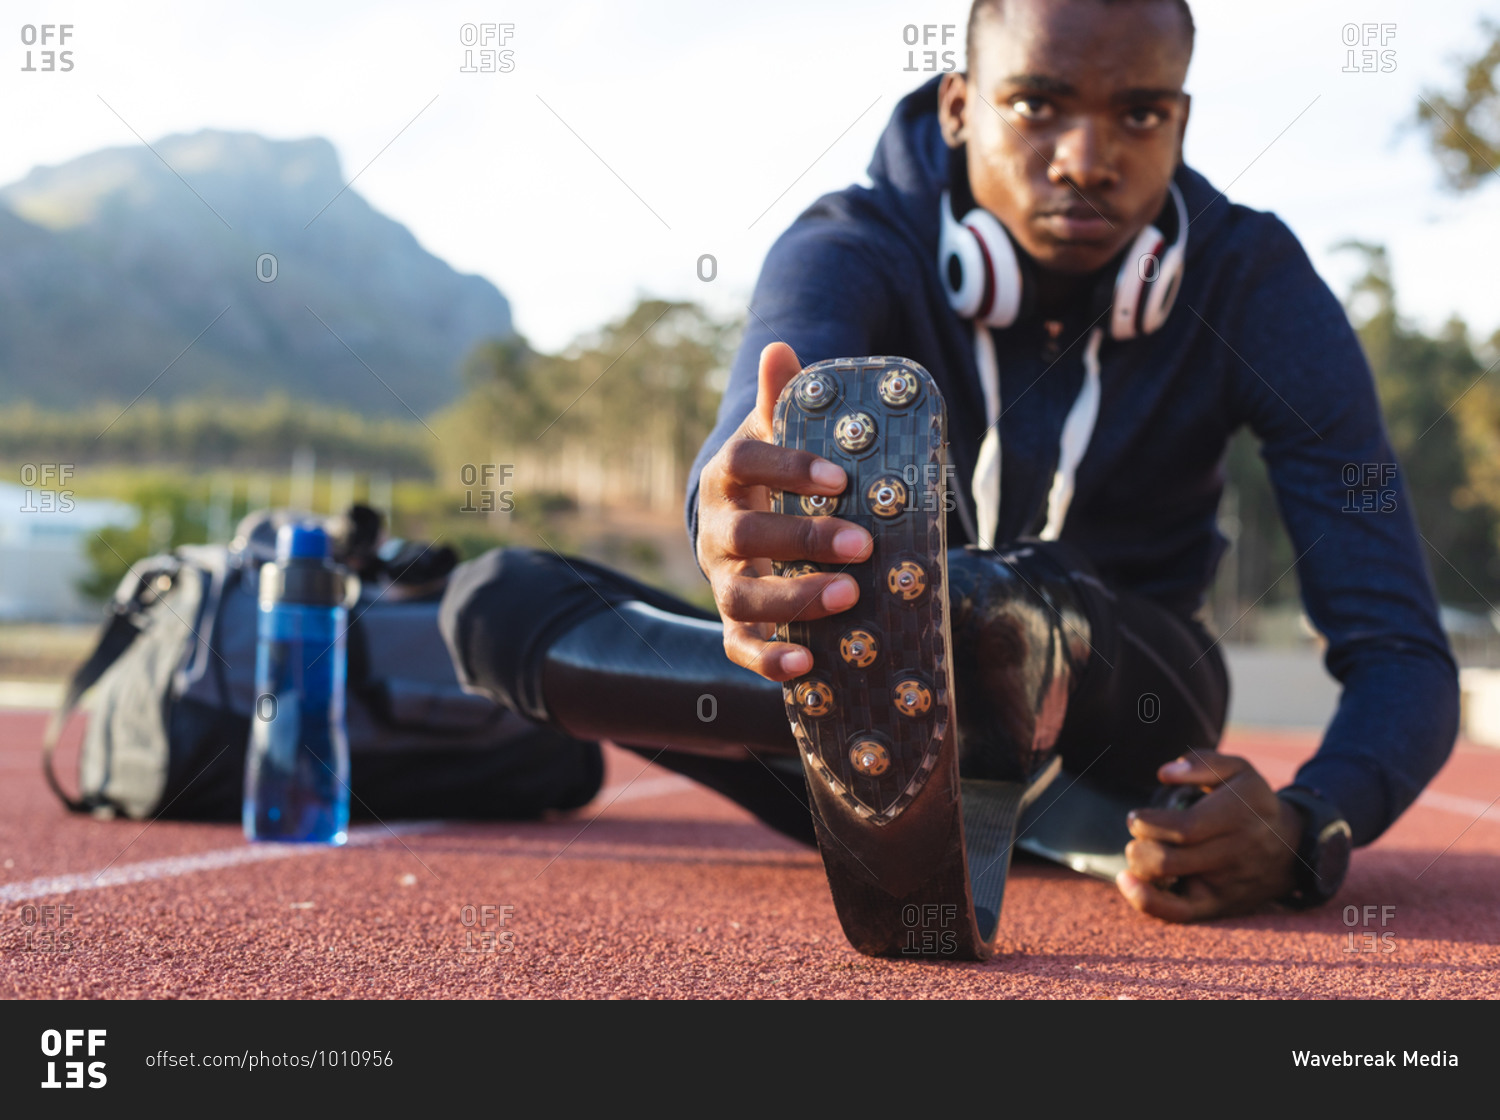 Fit, mixed race disabled male athlete at an outdoor sports stadium, with gym bag and water bottle stretching on race track wearing running blades. Disability athletics sport training.